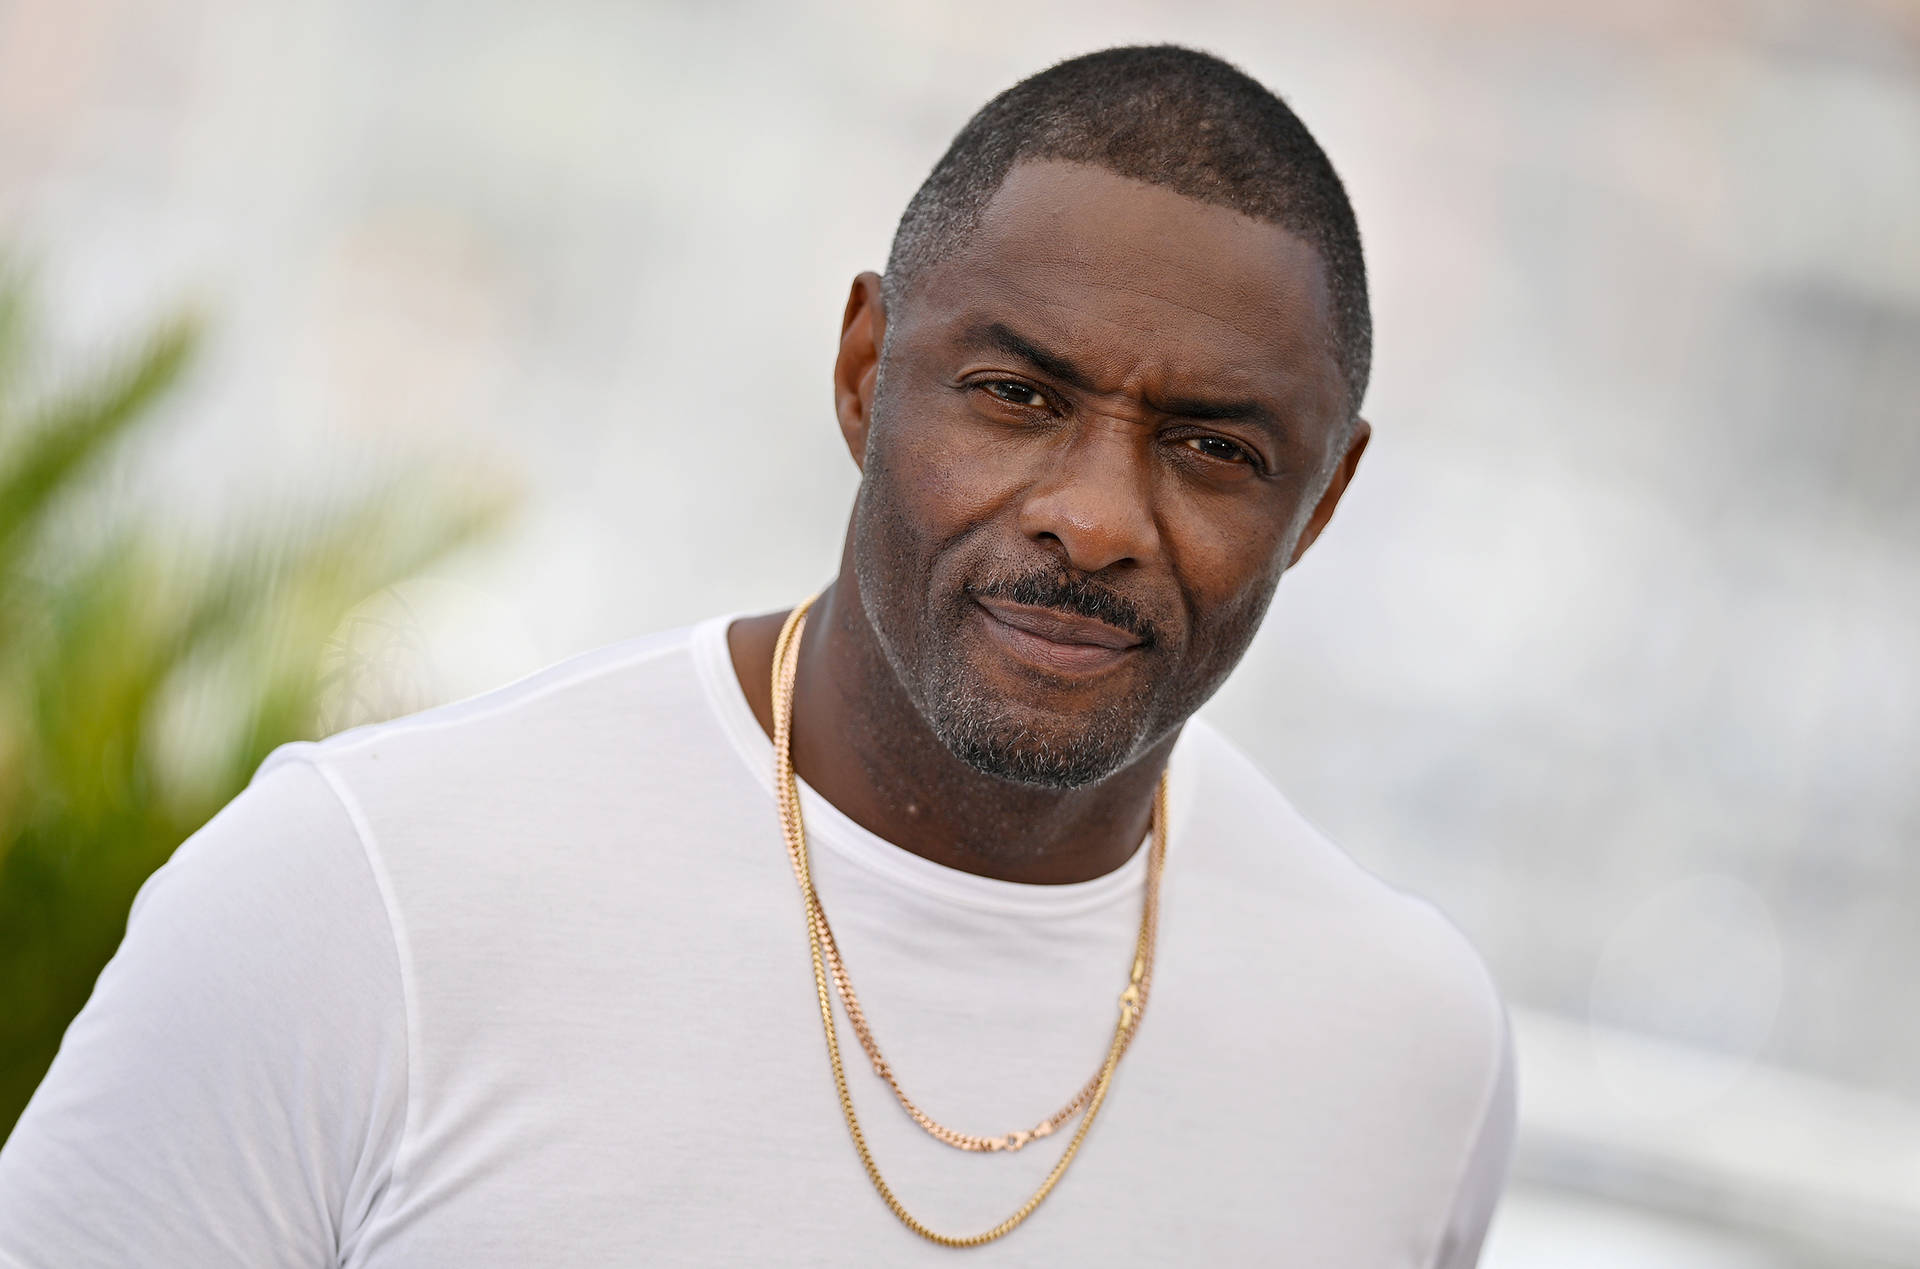 Idris Elba With White Shirt And Gold Necklaces